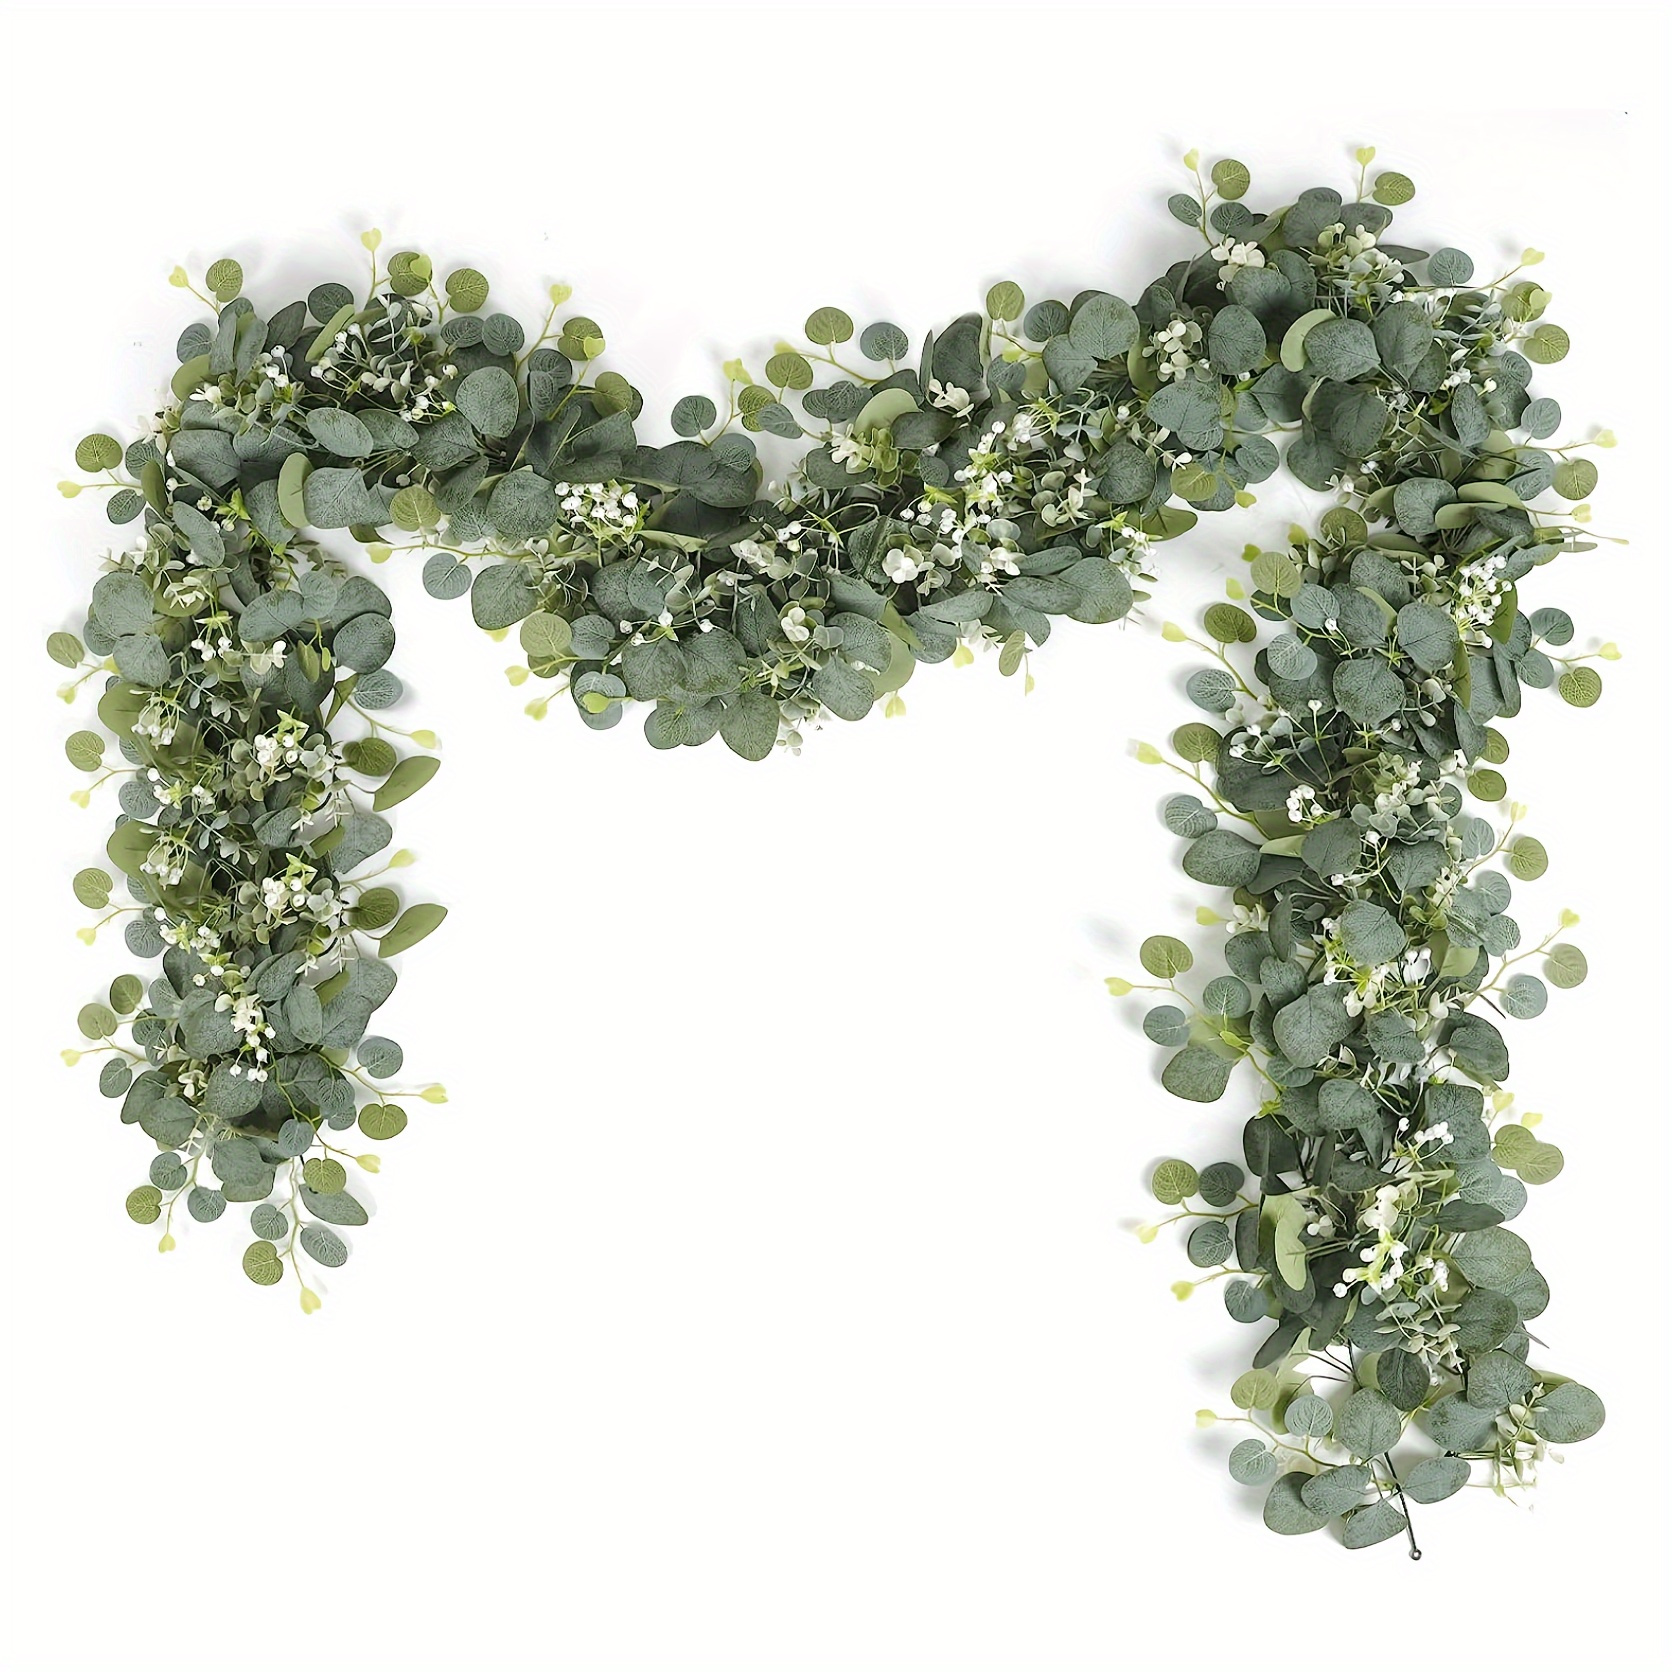 

Elegant 5.9ft Eucalyptus Garland With White Flowers - Silvery Dollar Leaves & Gypsophila, Artificial Greenery Vine For Wedding, Party, Home & Office Decor